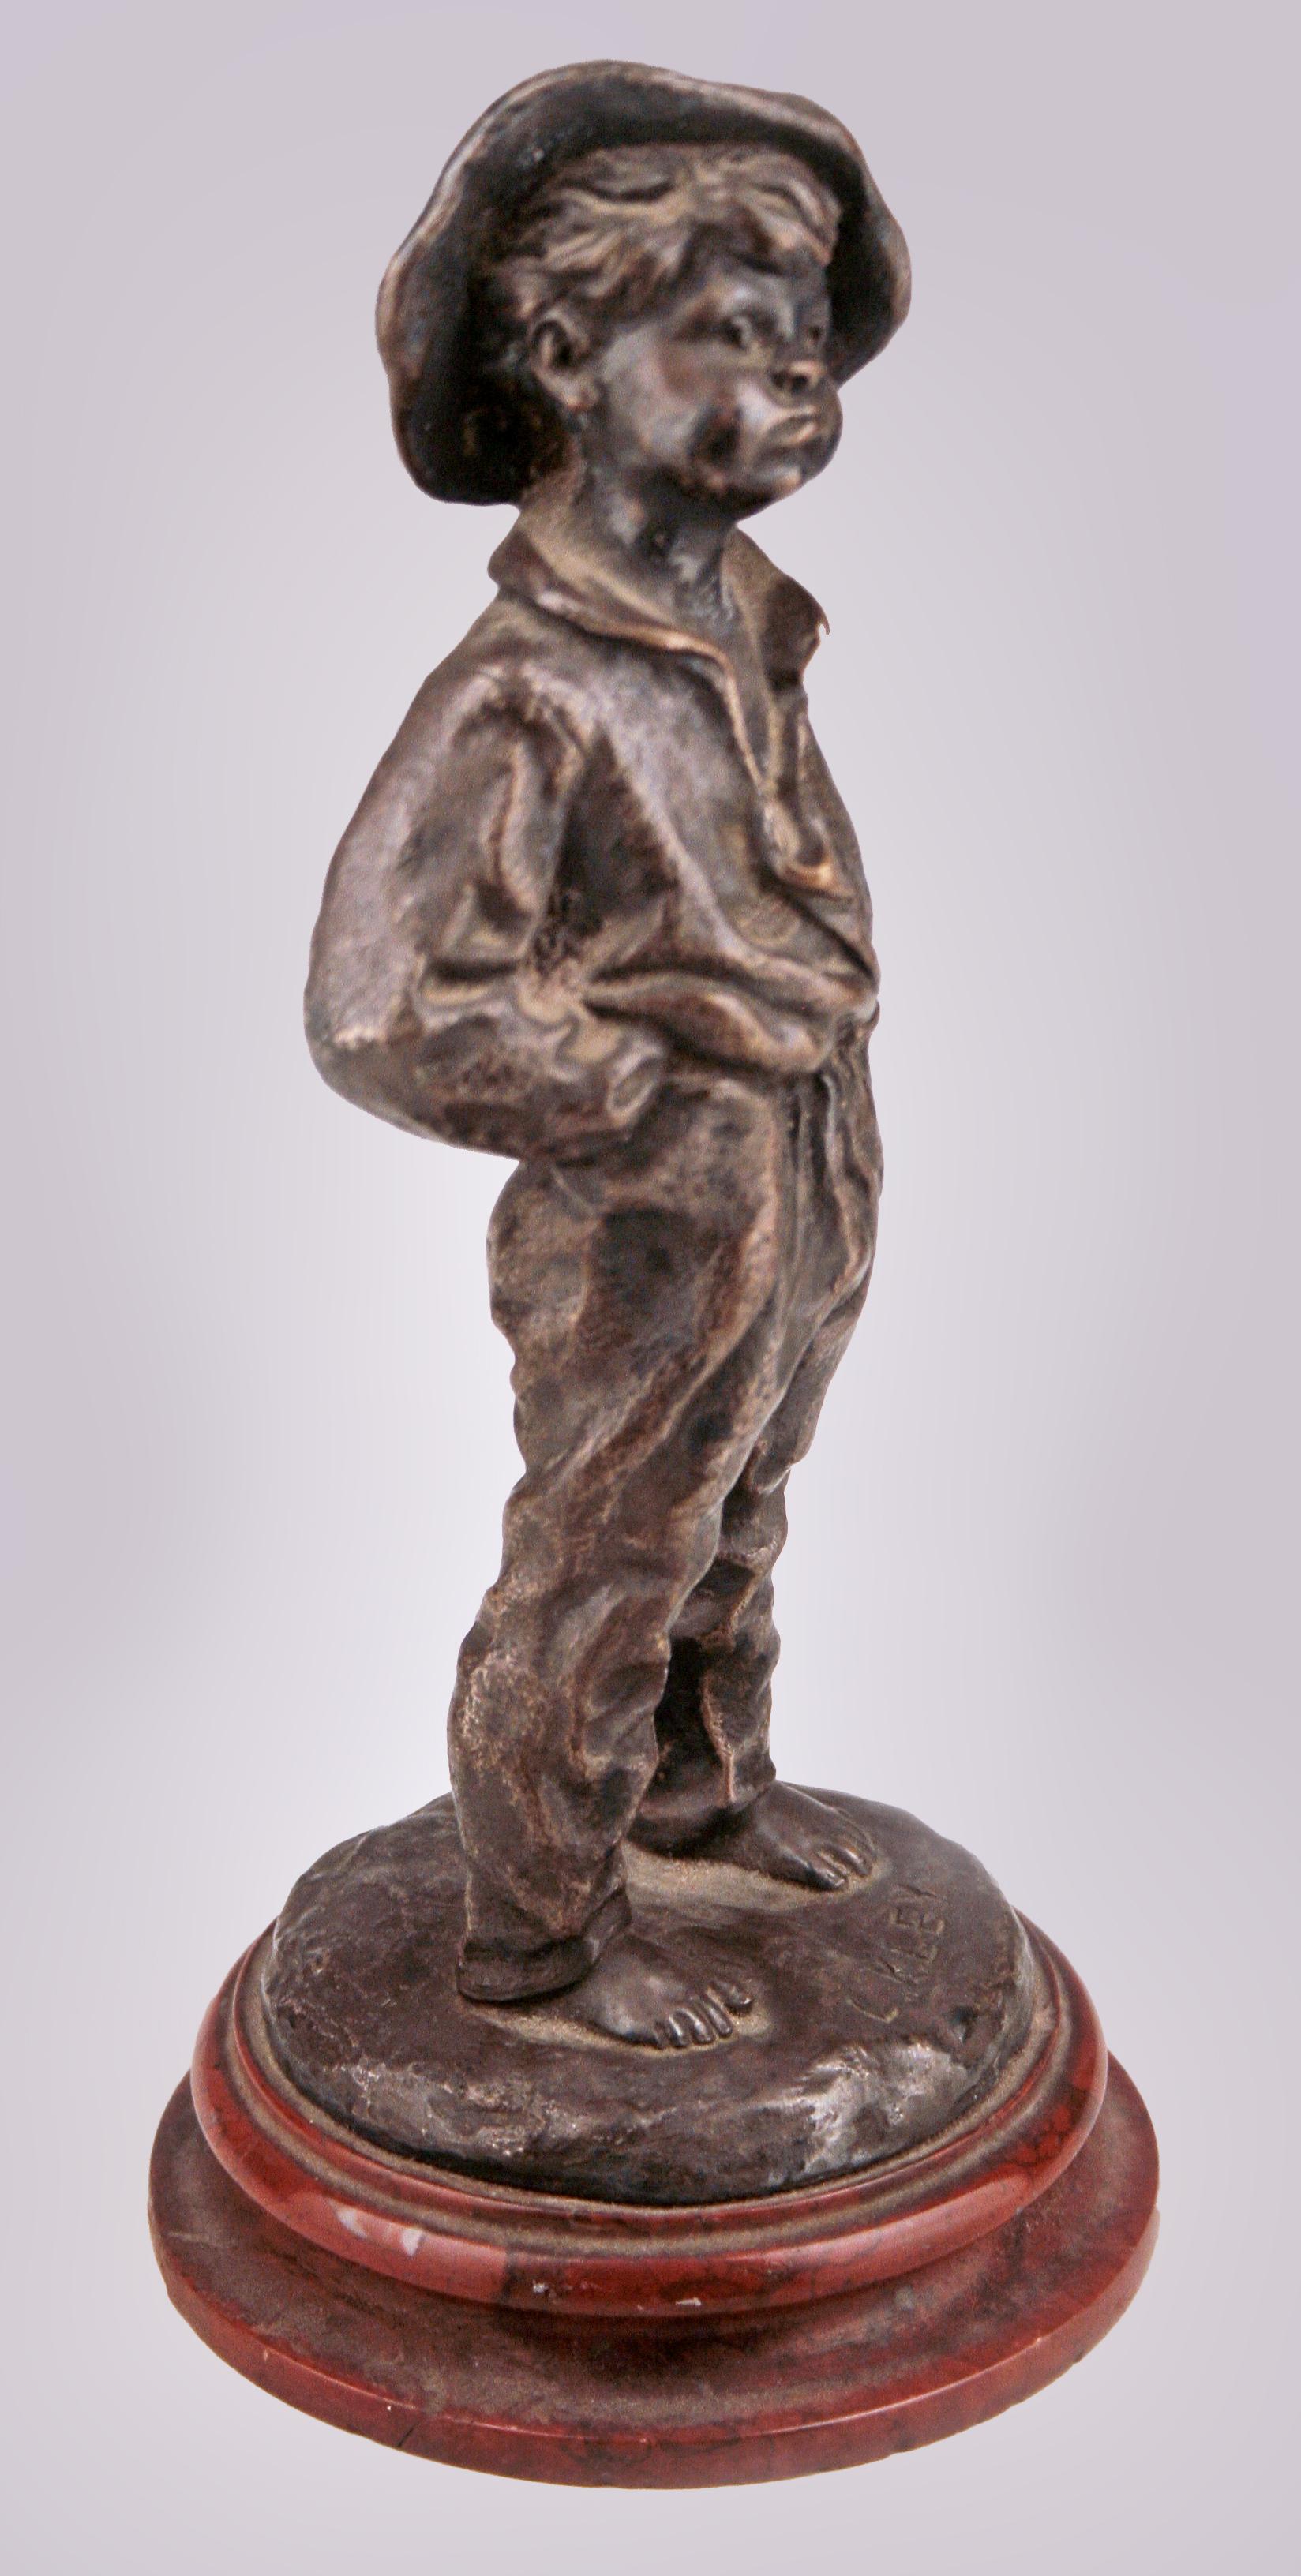 Molded Belle Époque French Bronze Sculpture of a Boy with Overall and Hat by Louis Kley For Sale